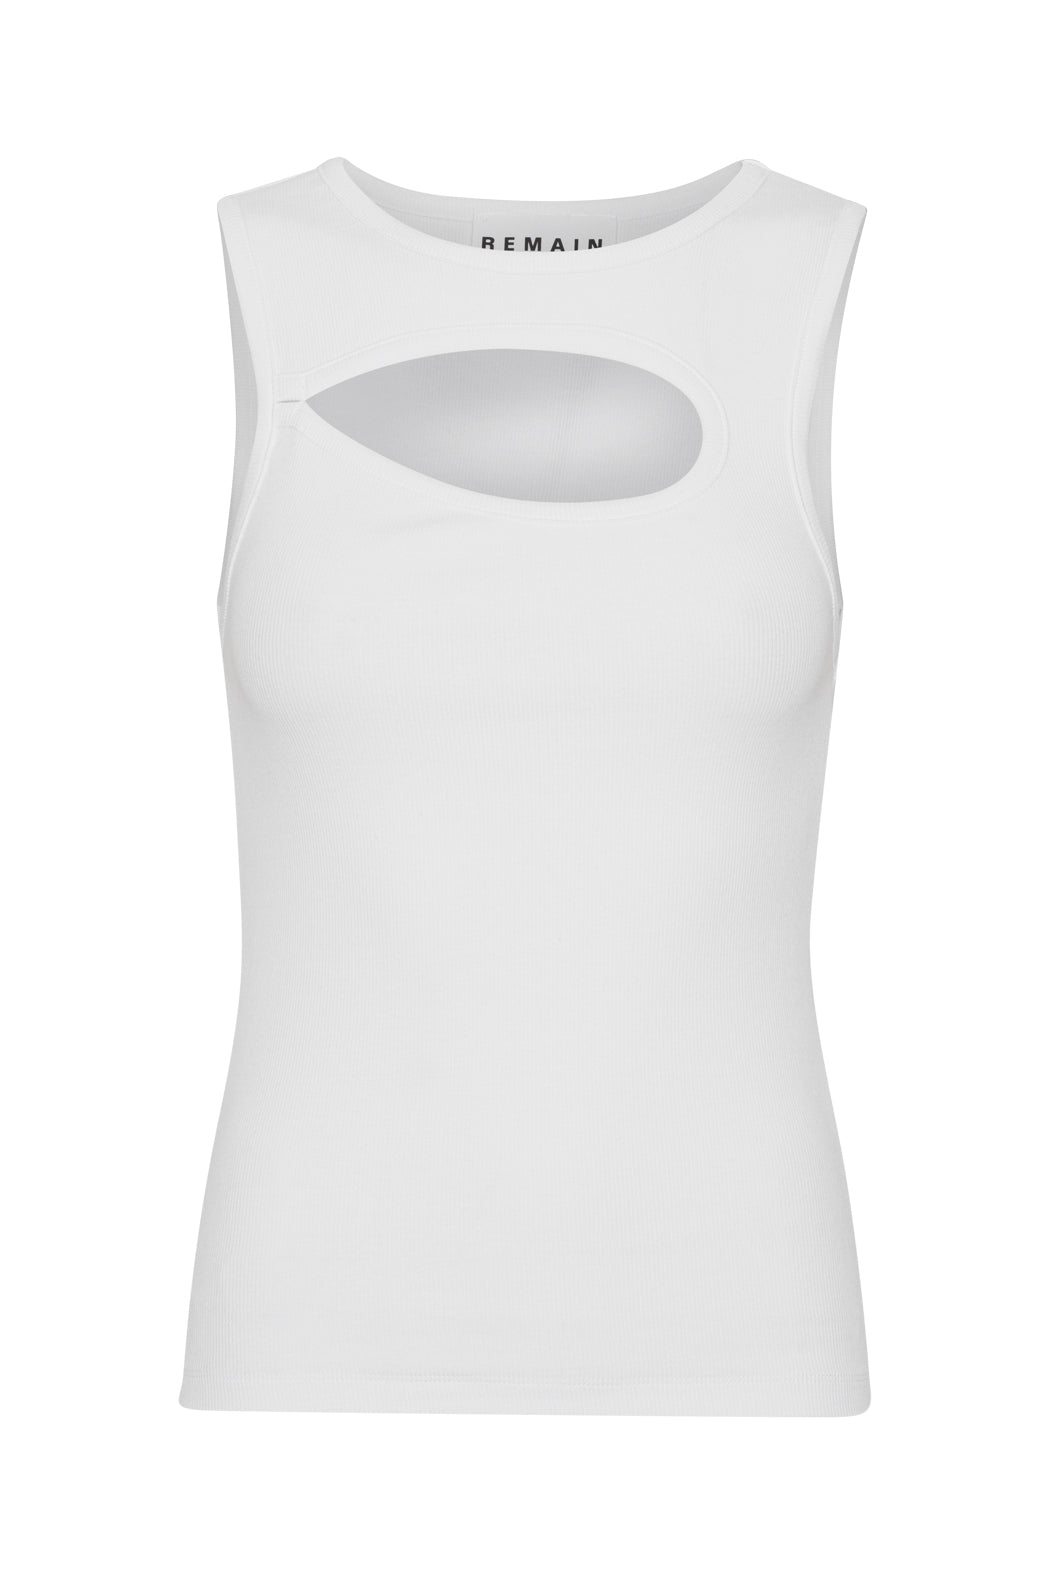 Remain Jersey Cut-Out Top